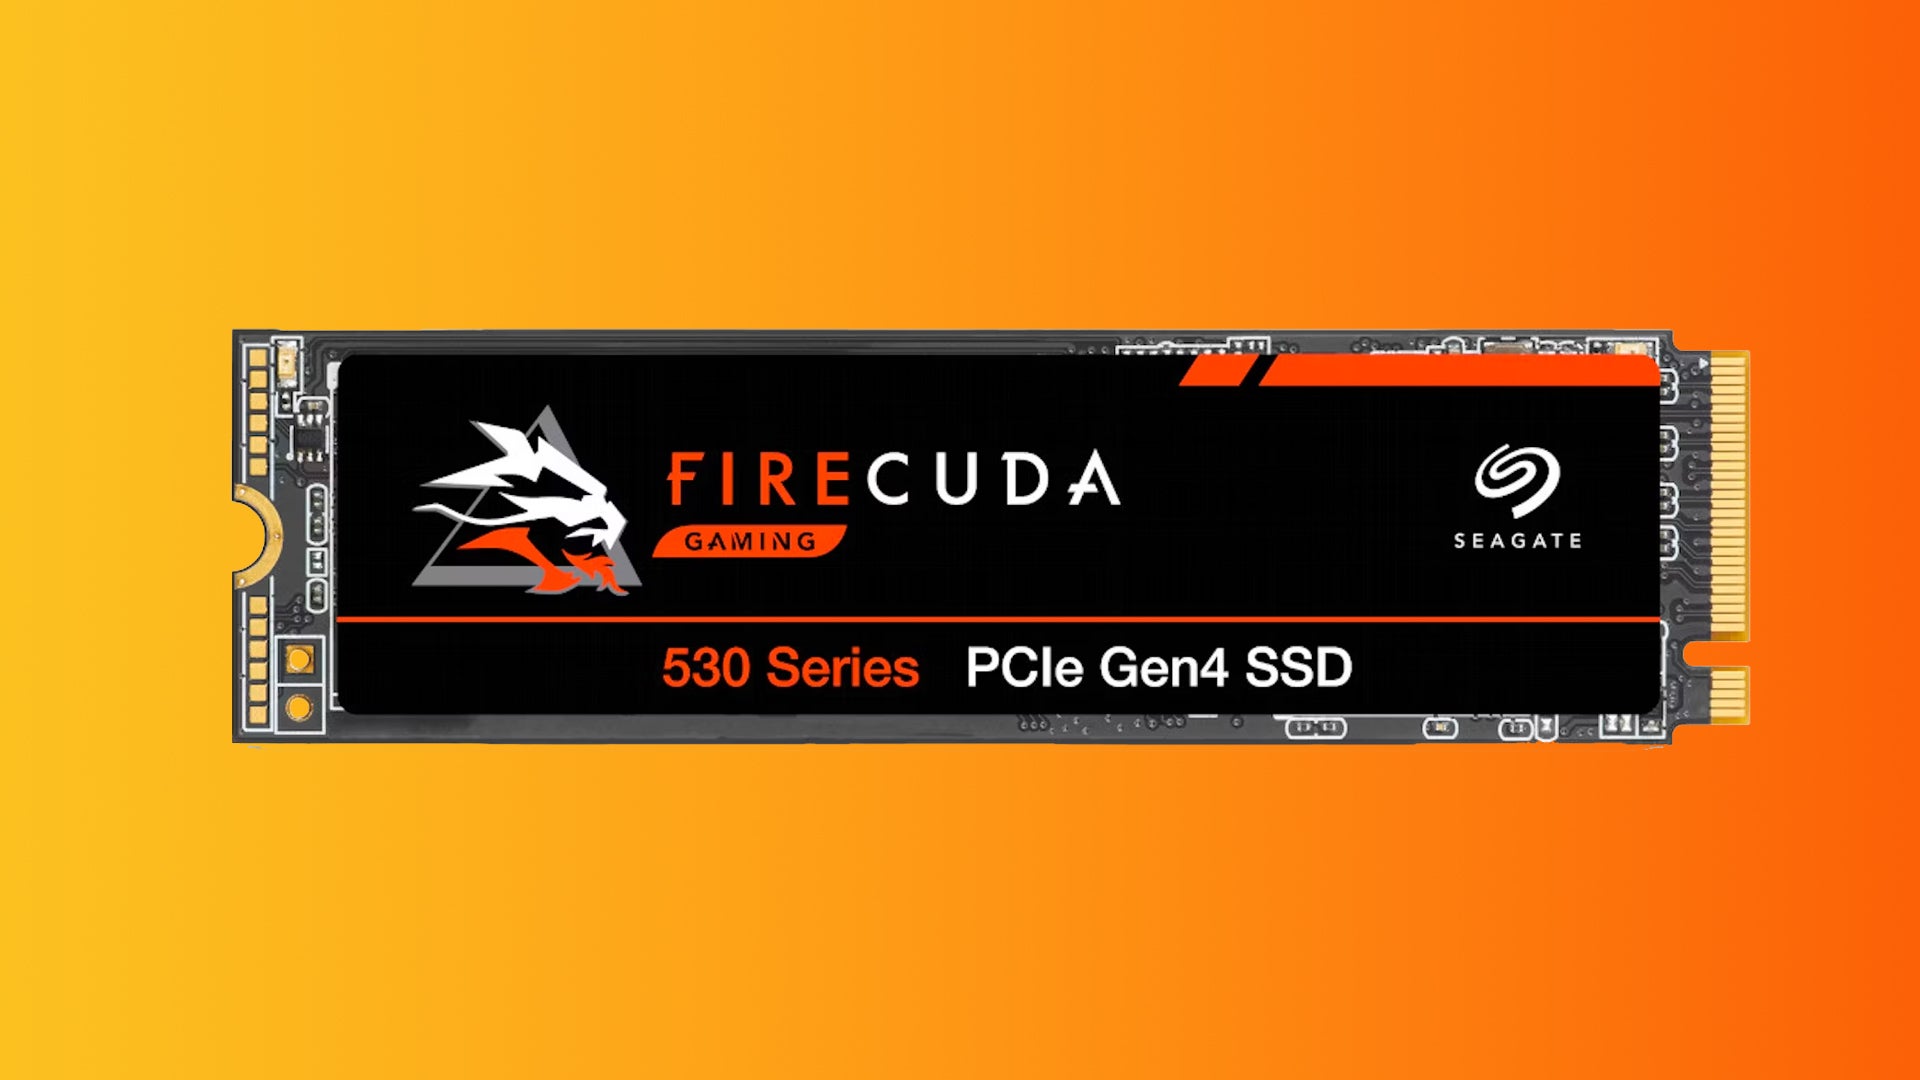 This 4TB Seagate Firecuda 530 NVMe SSD is just £219 from